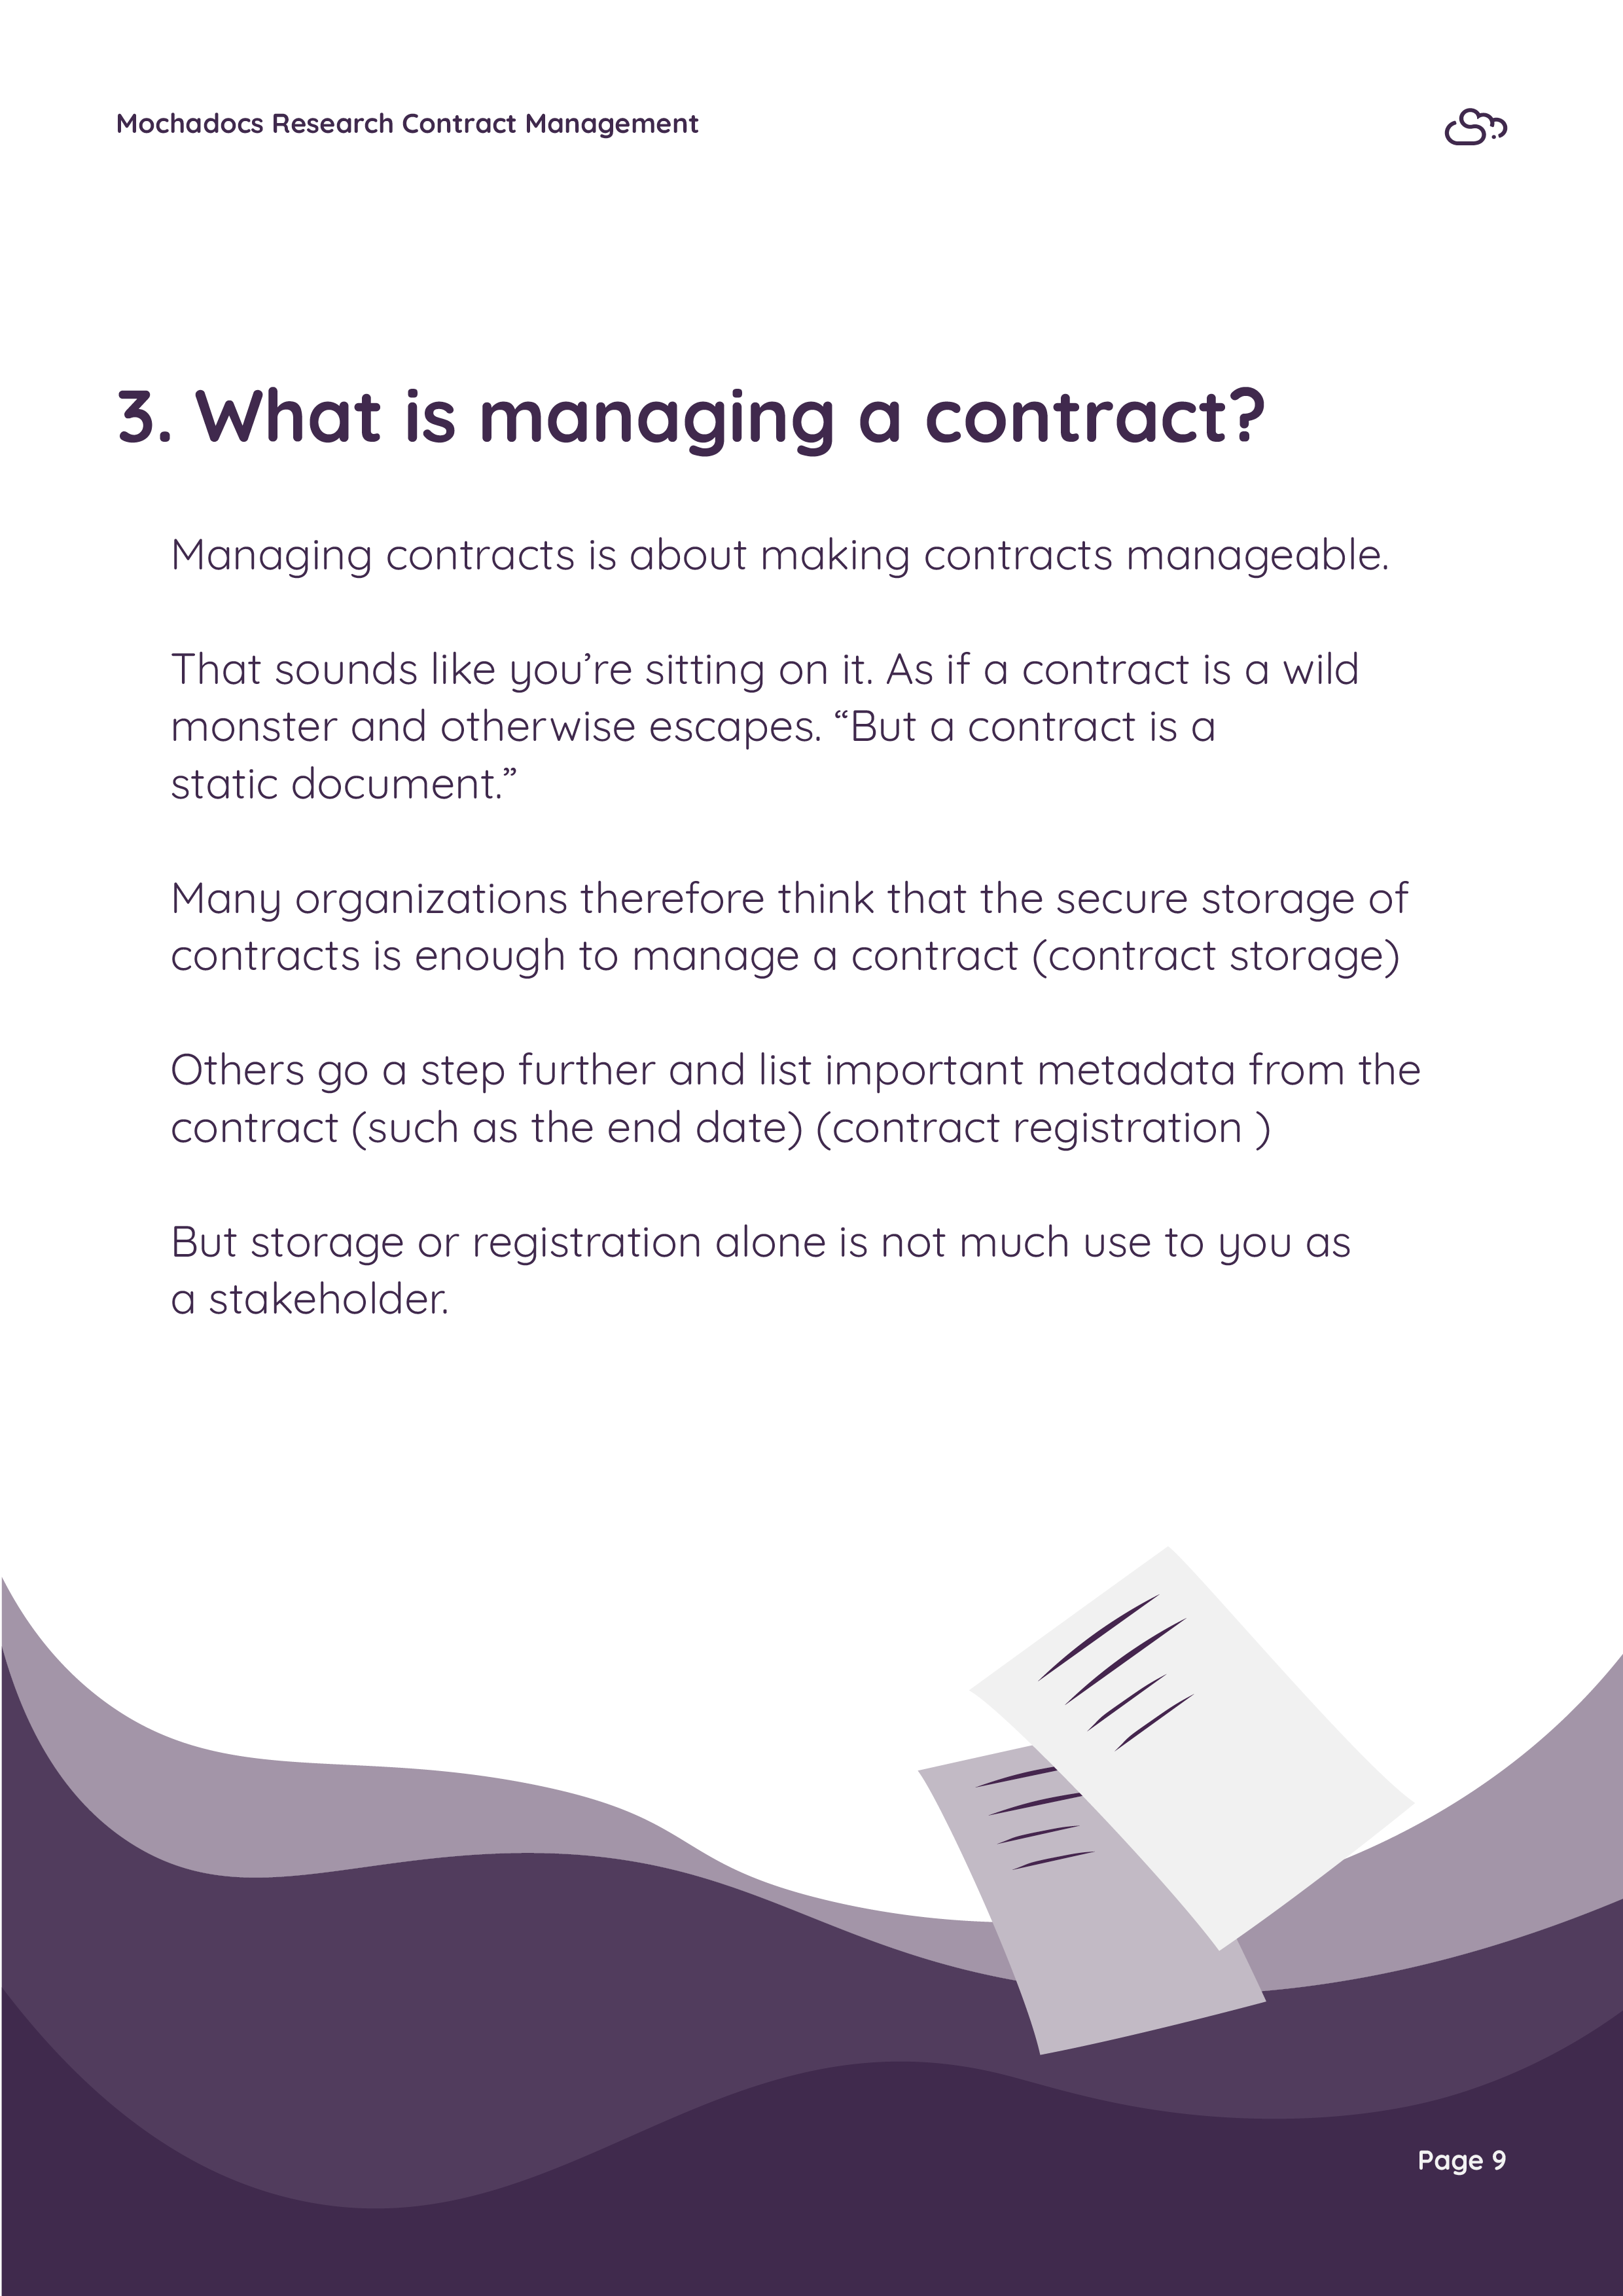 EN - What is a contract (managing)?9